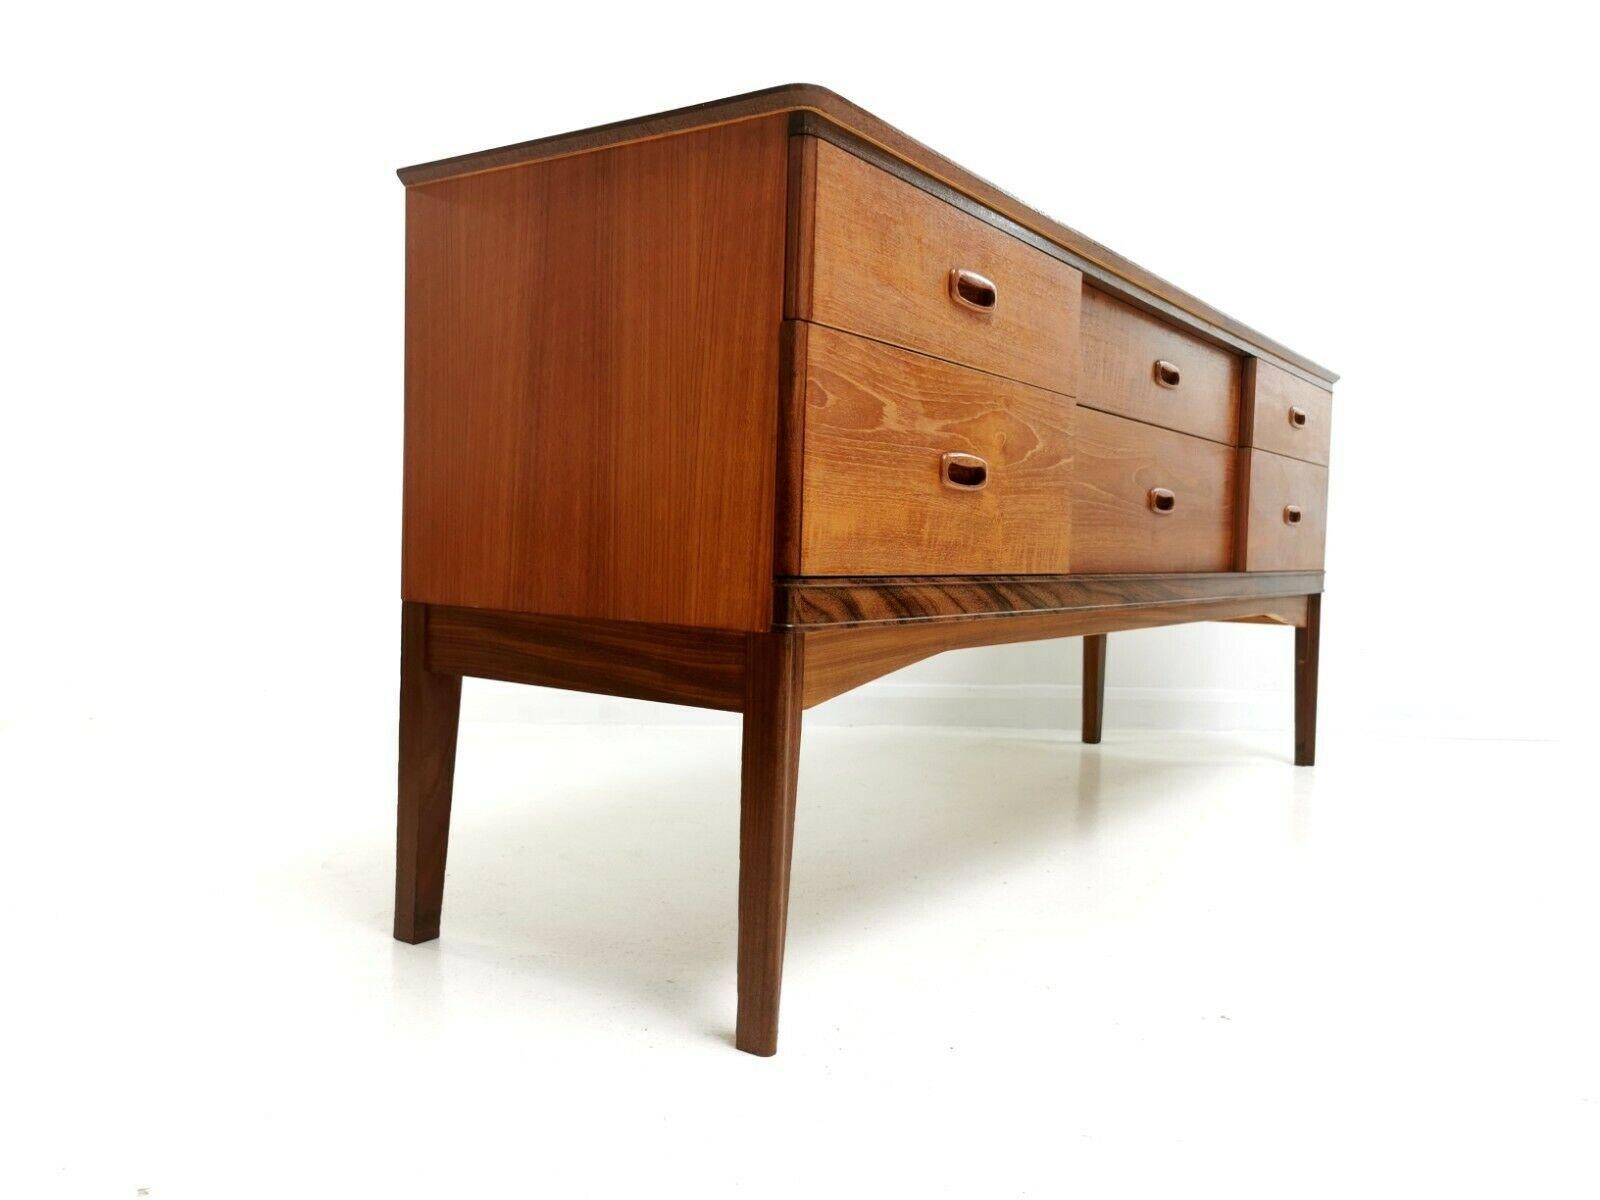 Austinsuite teak sideboard 

An Austinsuite sideboard by Frank Guille, which features six generous drawers with recessed handles. 

Danish design. Beautiful rich teak wood grain,

circa 1960s. Made in London, UK.

Dimensions (cm): 

164 W